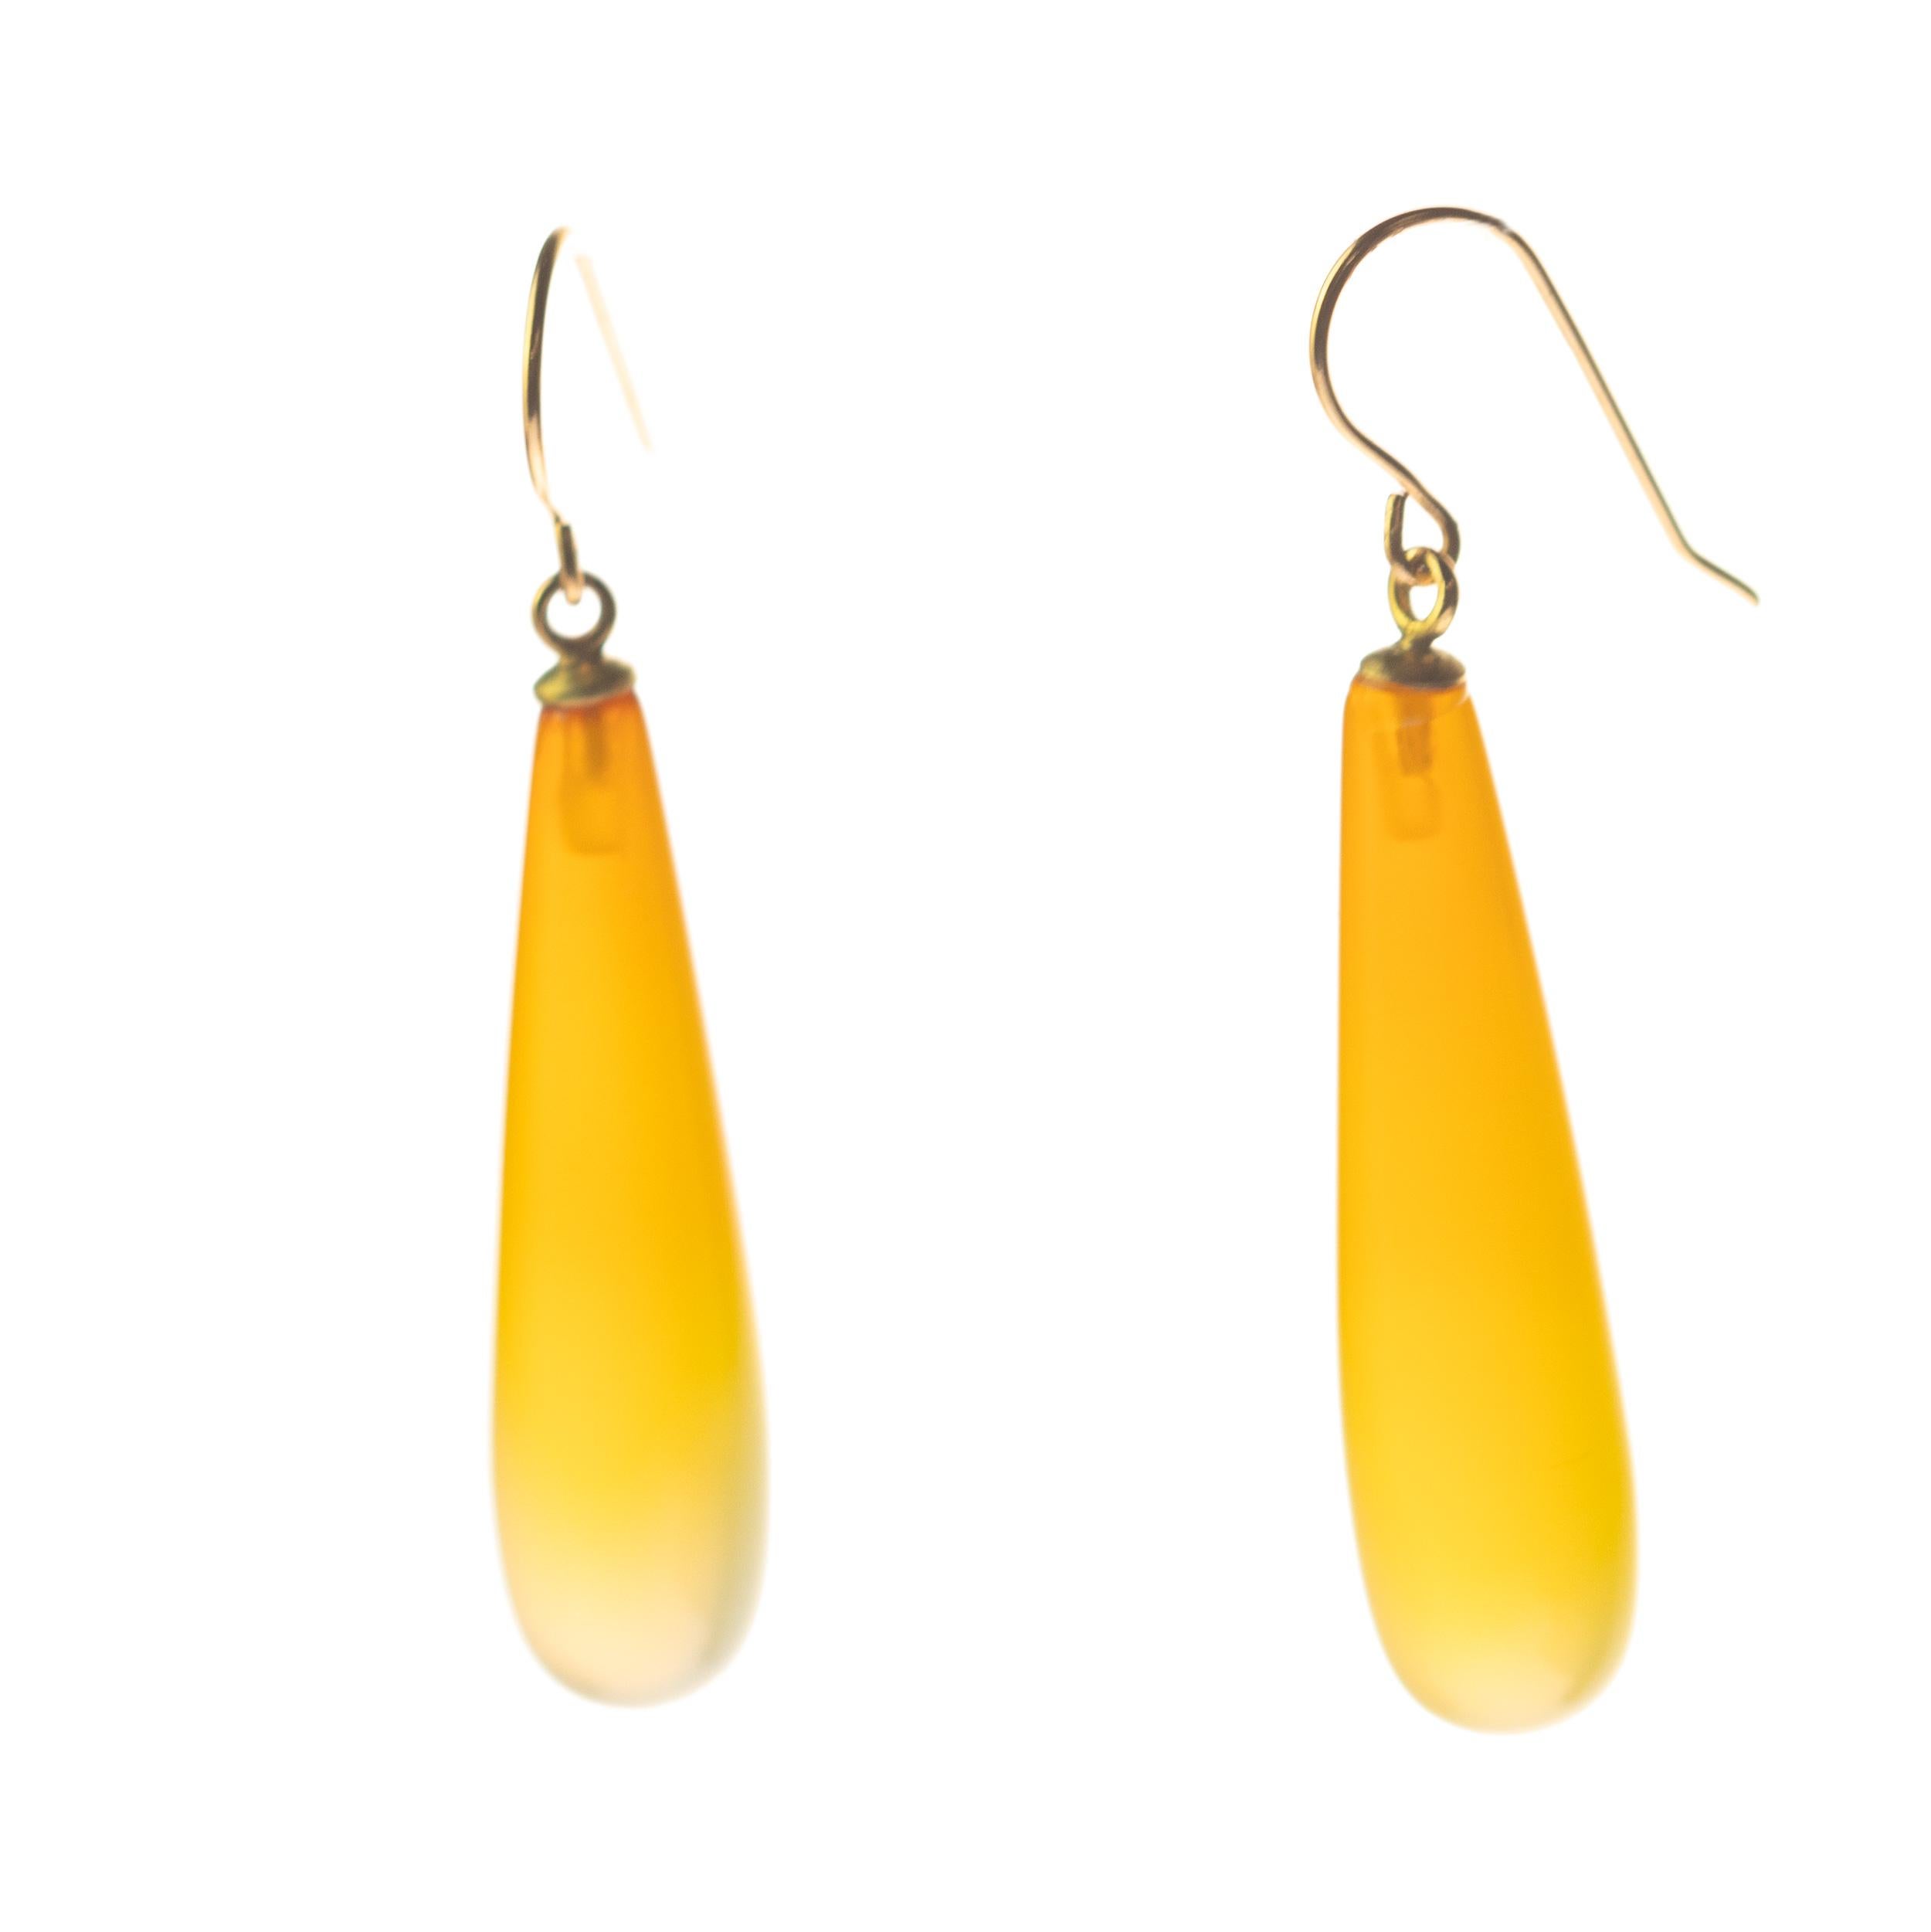 This stunning masterpiece with high quality craftsmanship was born in the Intini Jewels workshop. Our designers add all the italian modern style and glamour in one exquisite piece. Stunning Agate teardrops hanging from 18 karat yellow gold.

One of